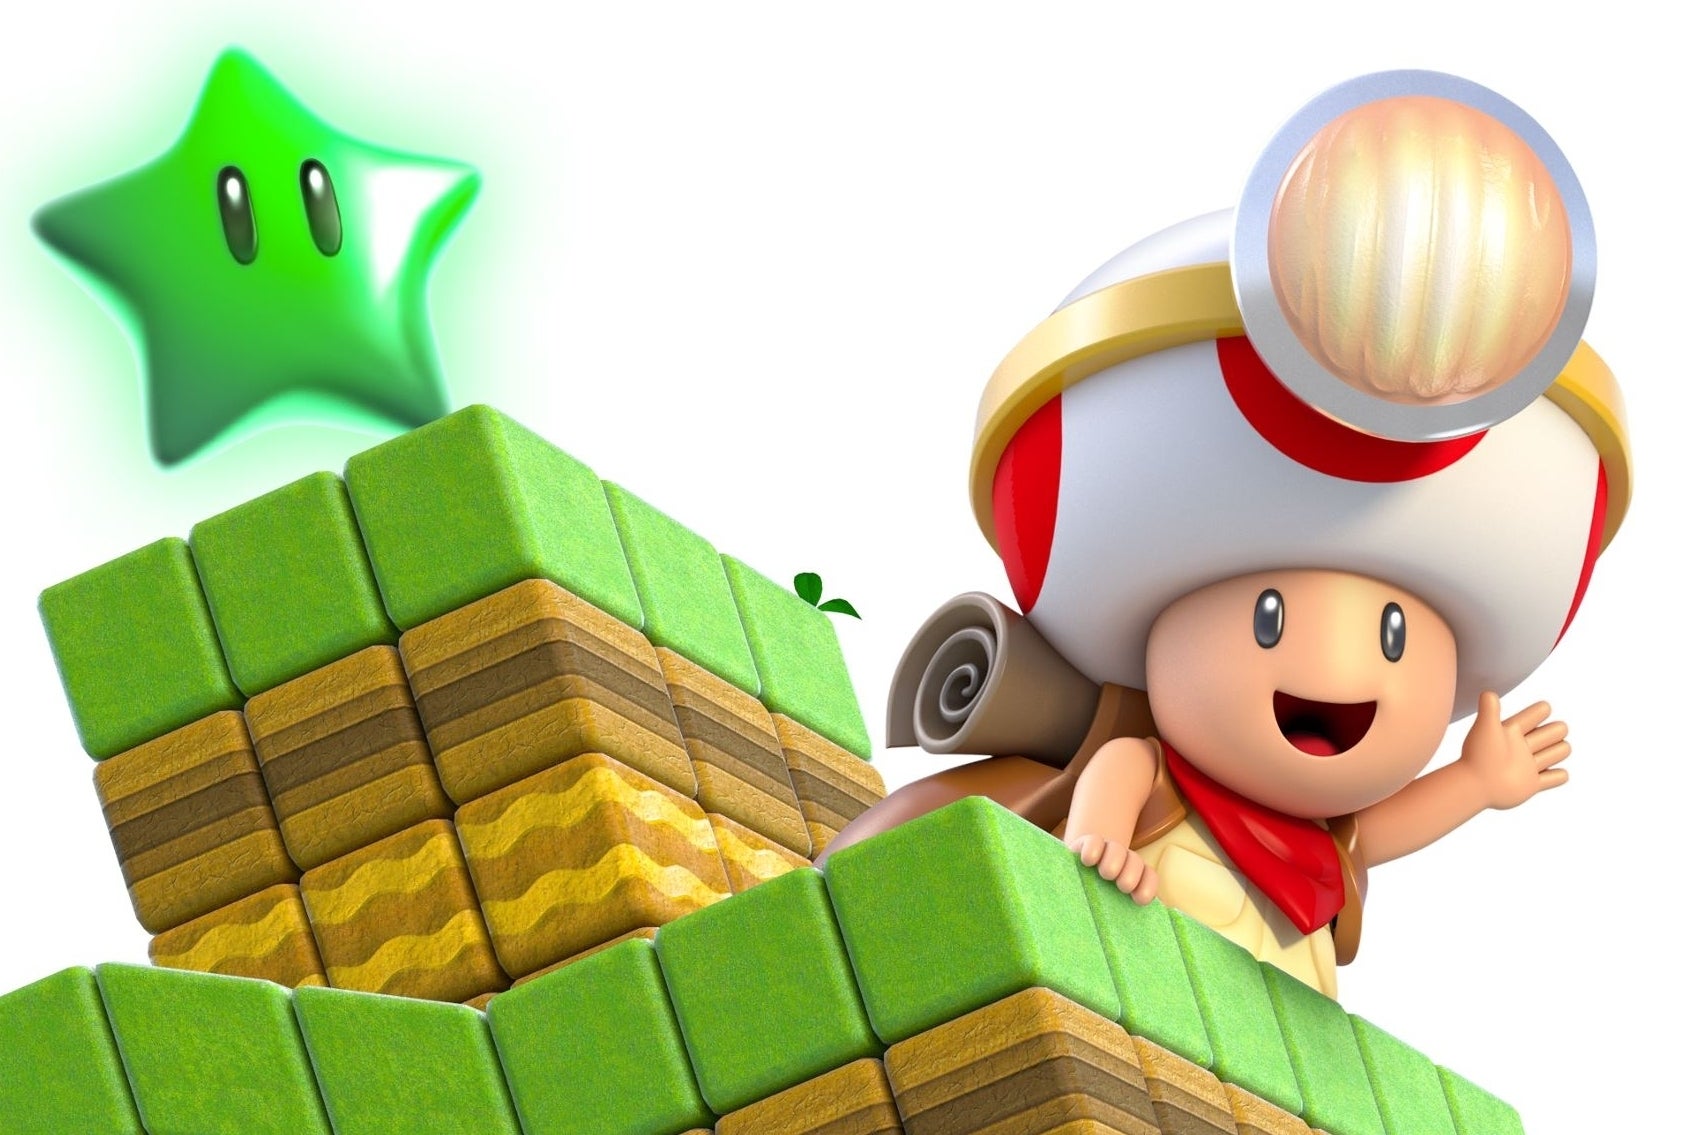 Image for Video: Super Mario 3D World's Captain Toad levels shown off